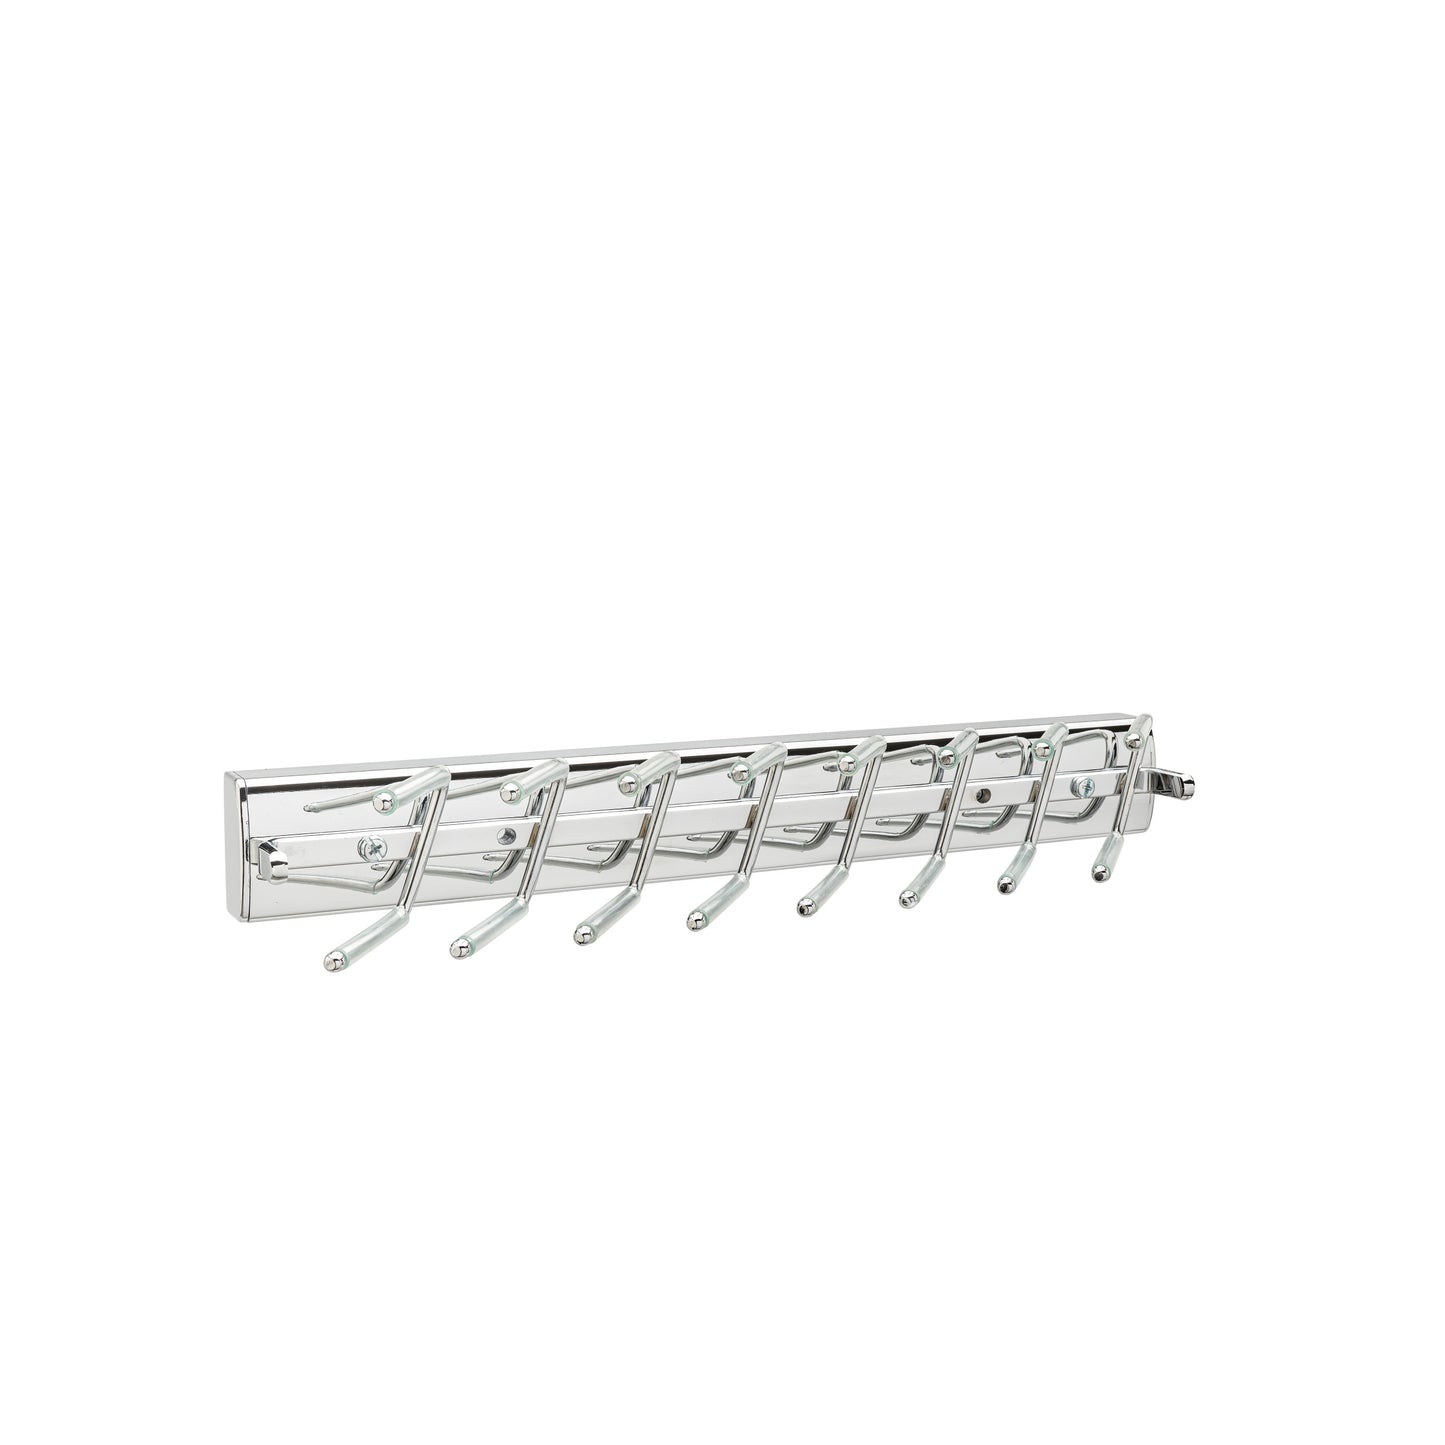 Sidelines / TRCPOSL-14-CR-1 / Deluxe Pop Out Tie Rack Custom Closet Systems